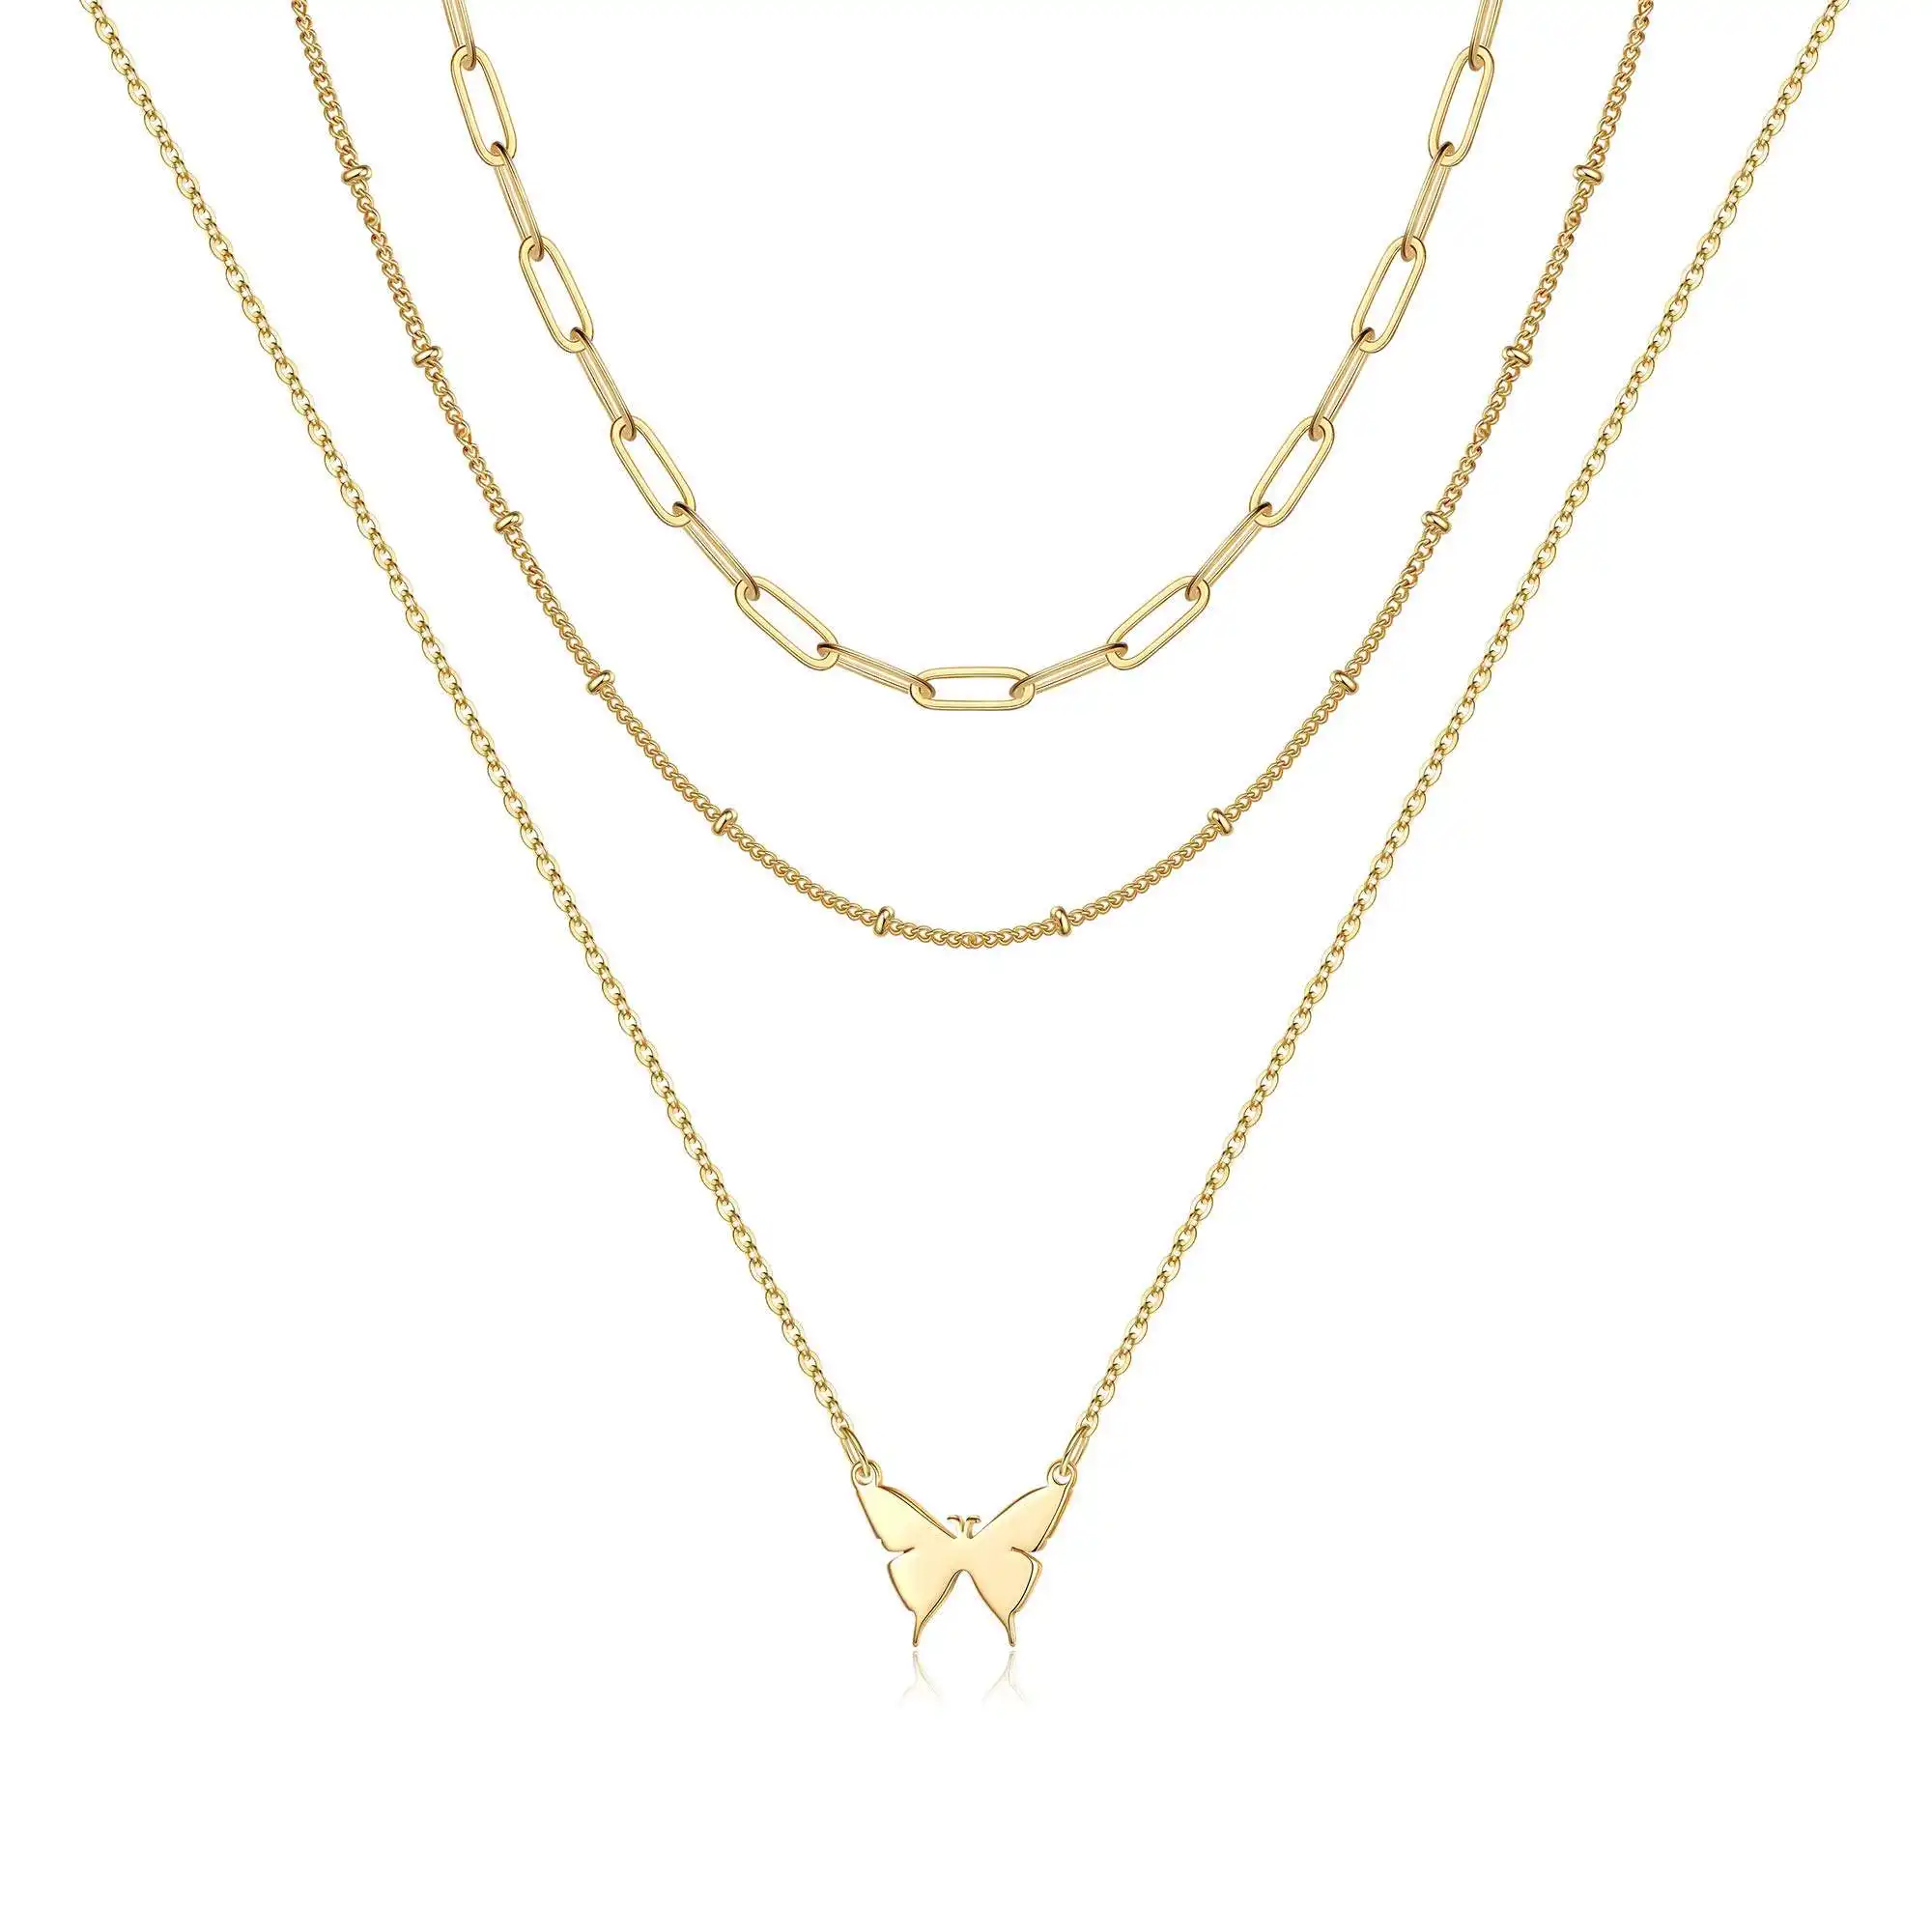 Original 925 Silver Fine Jewelry Fashion Design Layered Butterfly Pendant 14k Gold Plated Beaded 3 Layer Chain Necklace